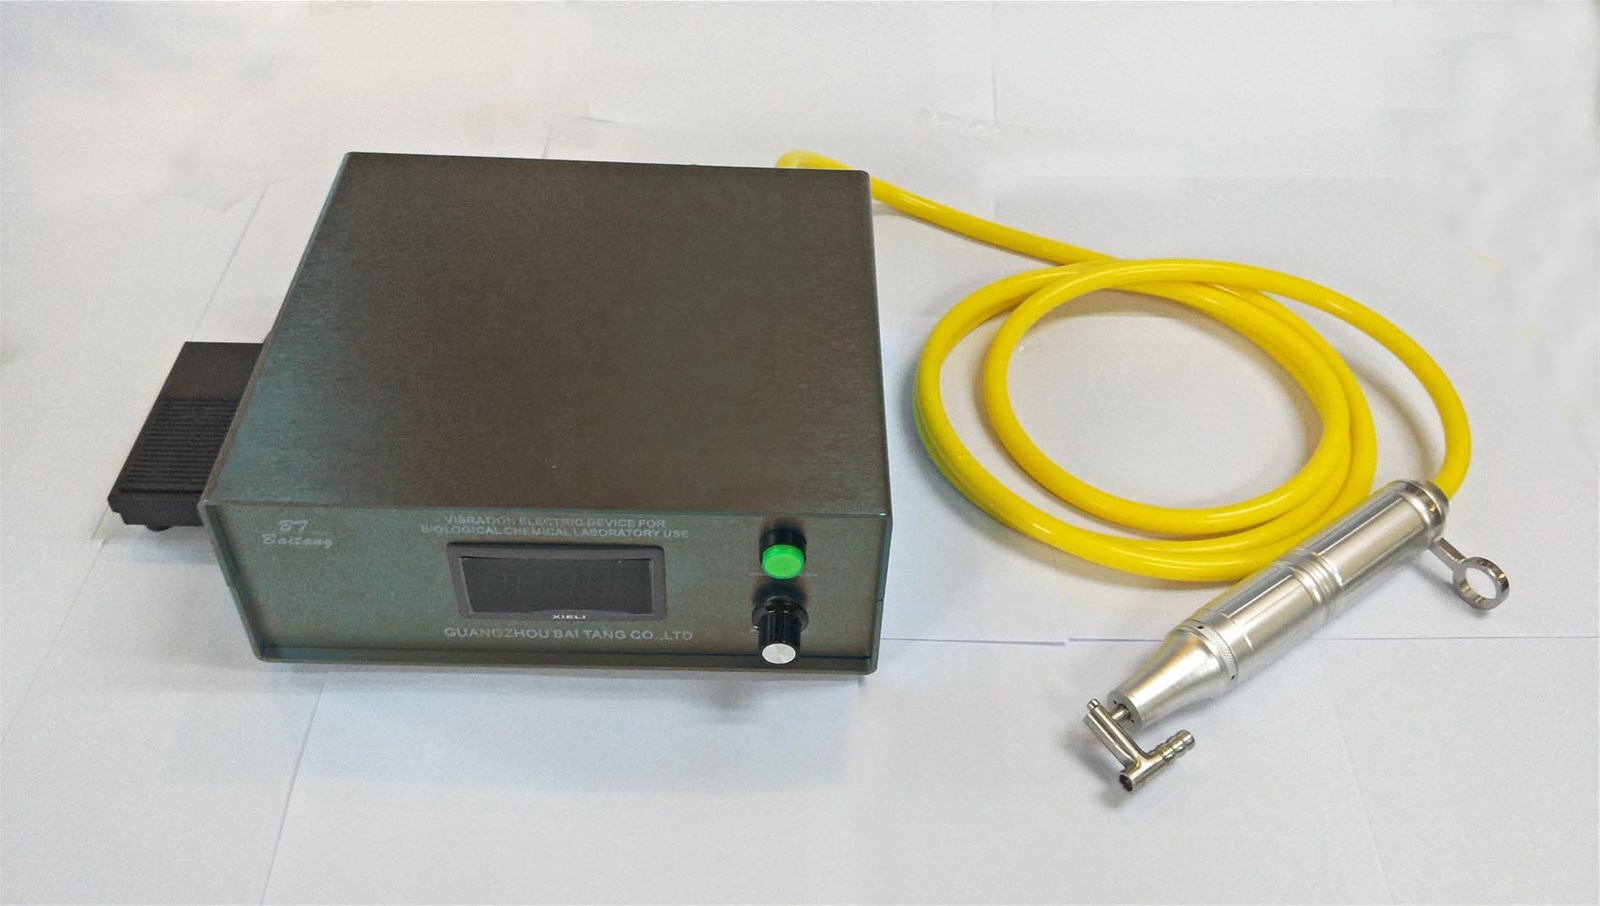 High Frequency Electric Vibration Device for Liposuction